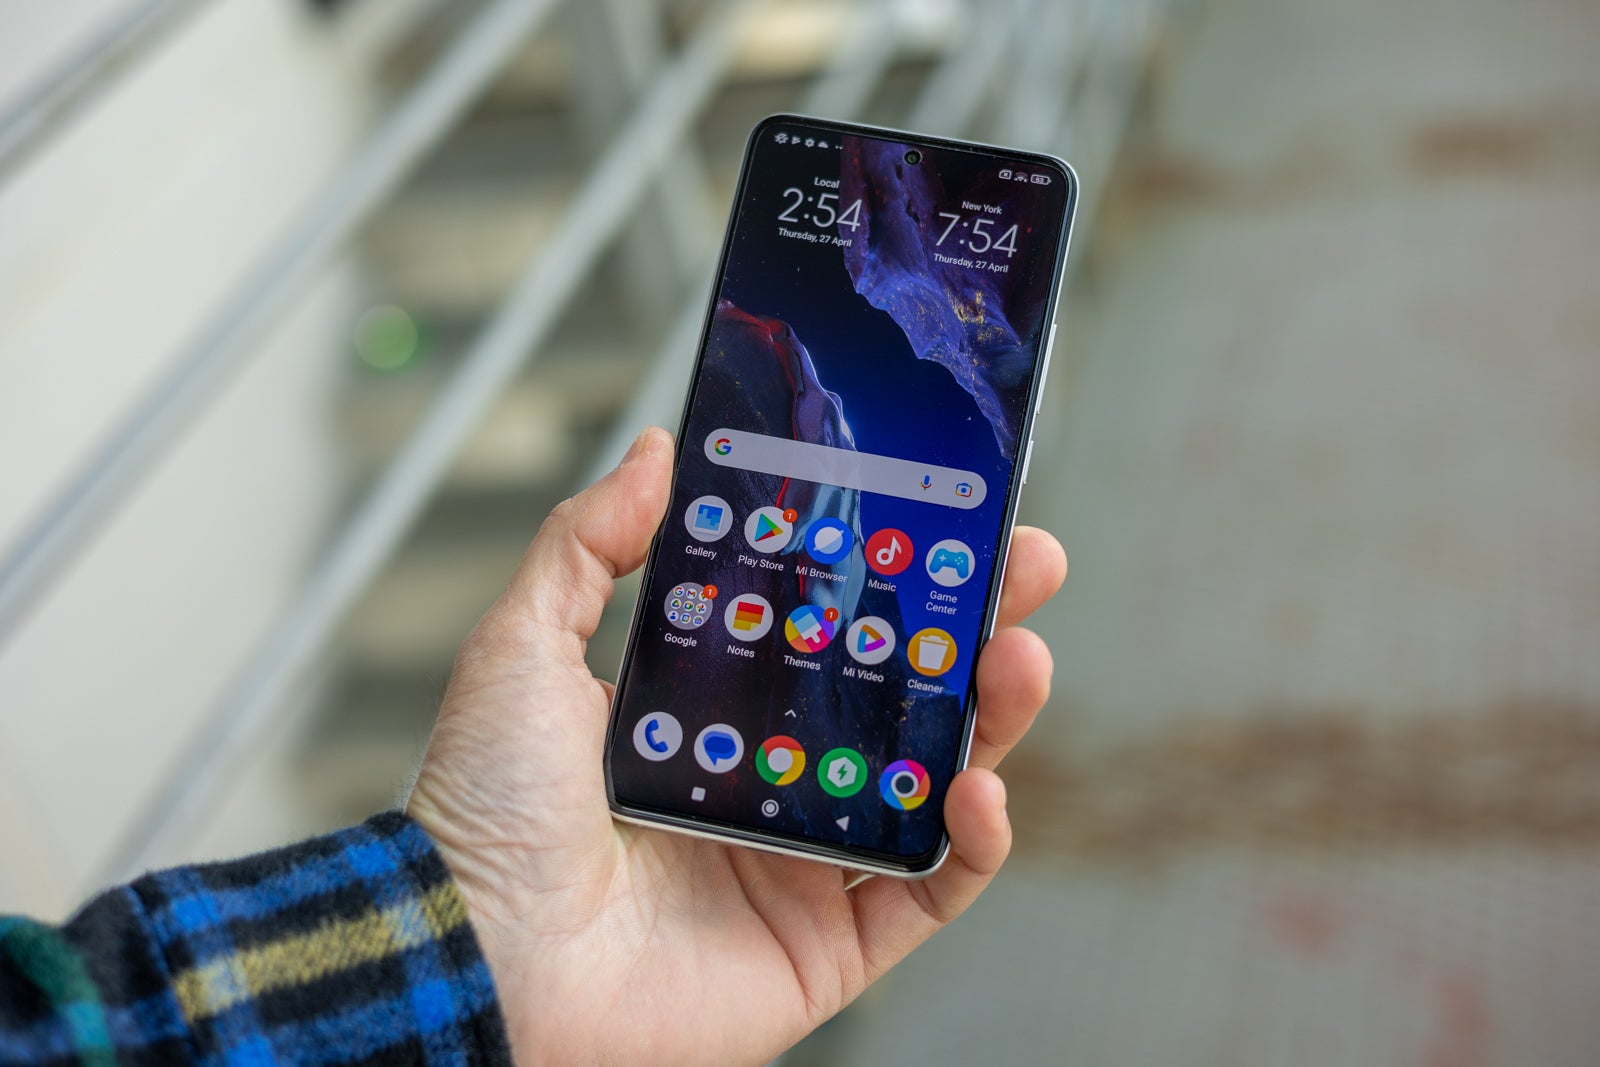 Poco F5 Pro 5G Leaks: Display Specs Promise An Immersive Viewing Experience